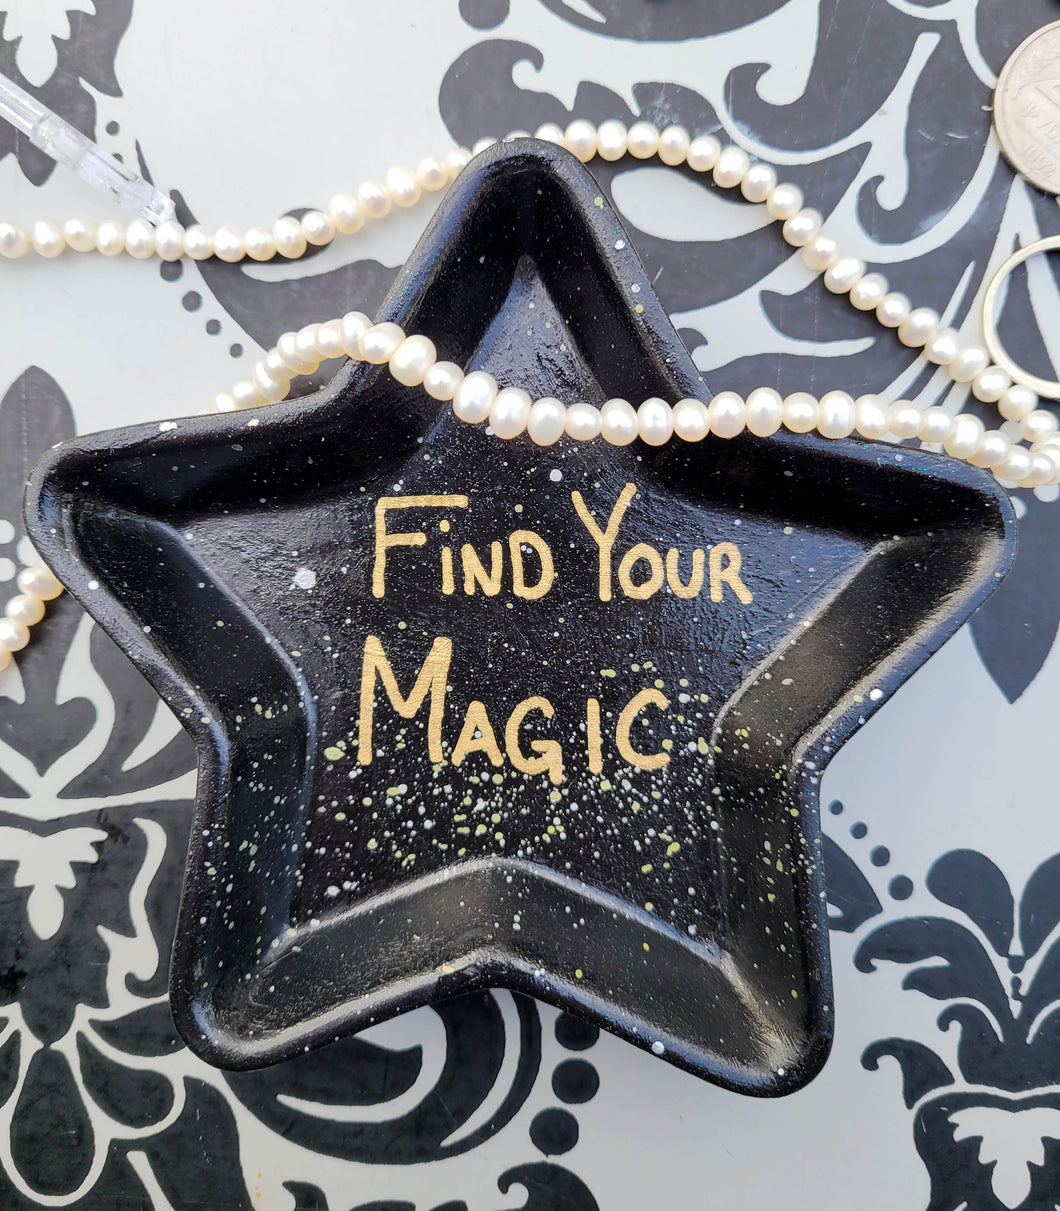 Find your Magic